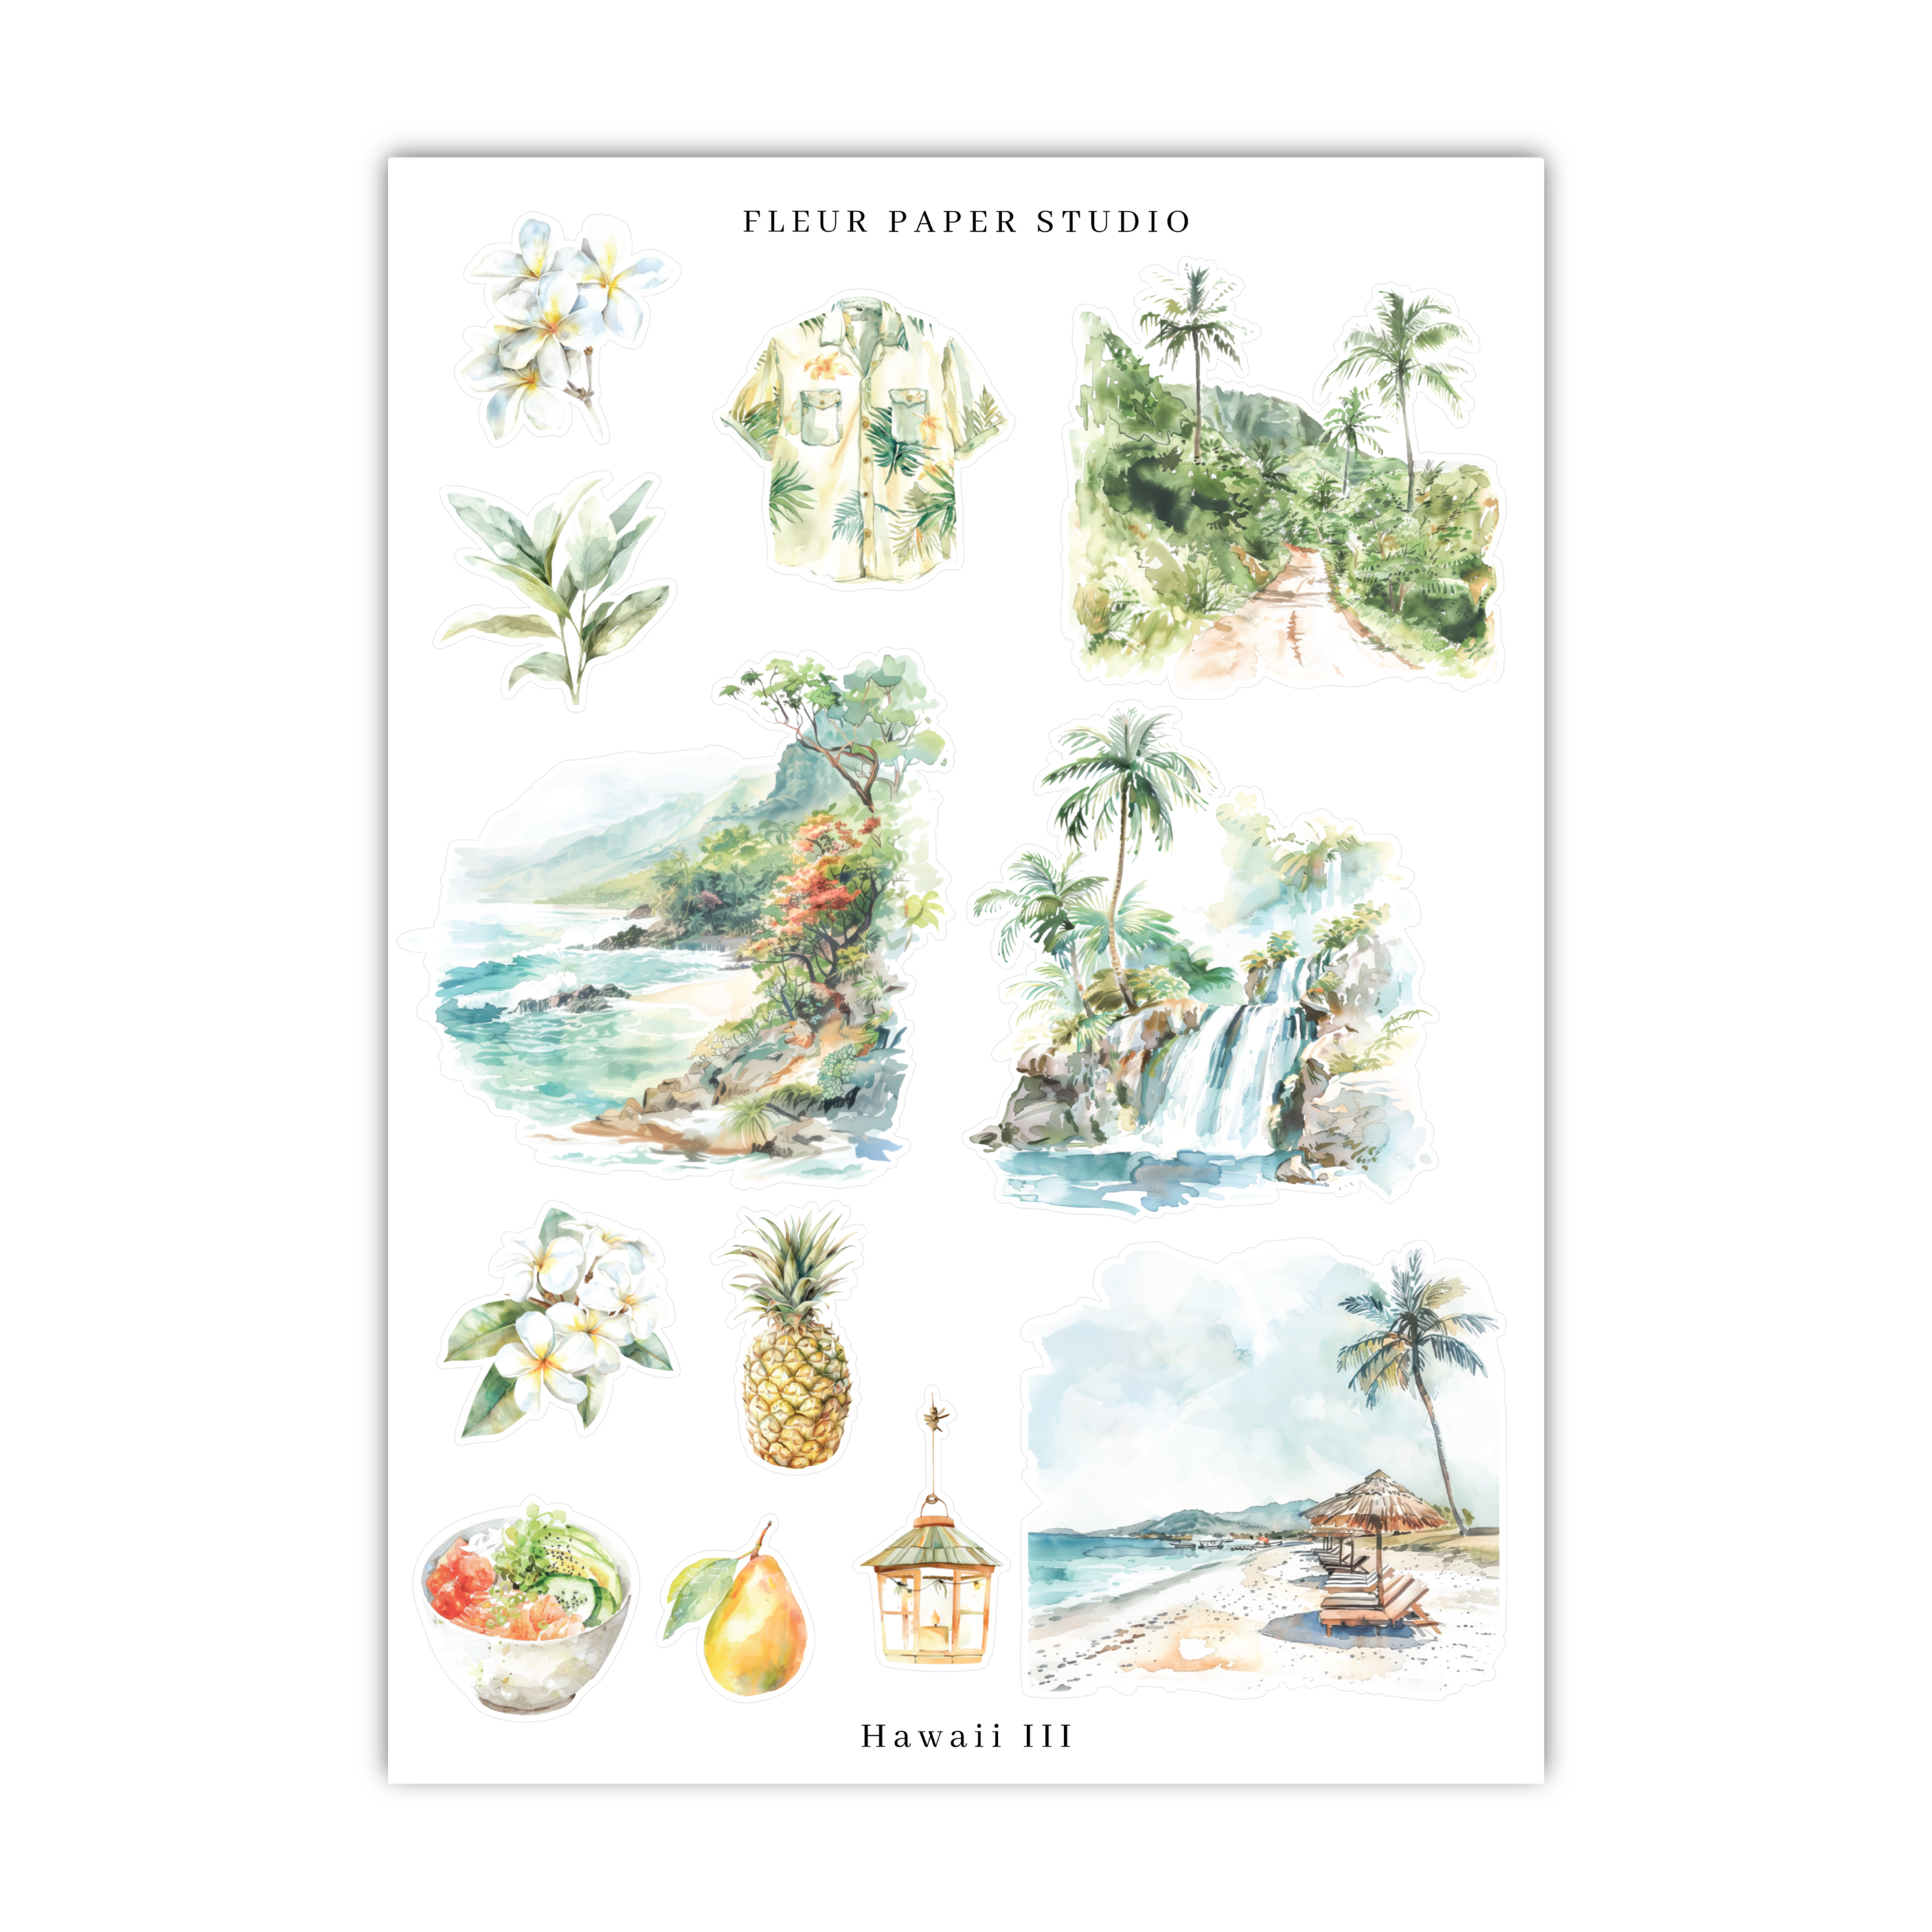 a watercolor painting of a tropical scene